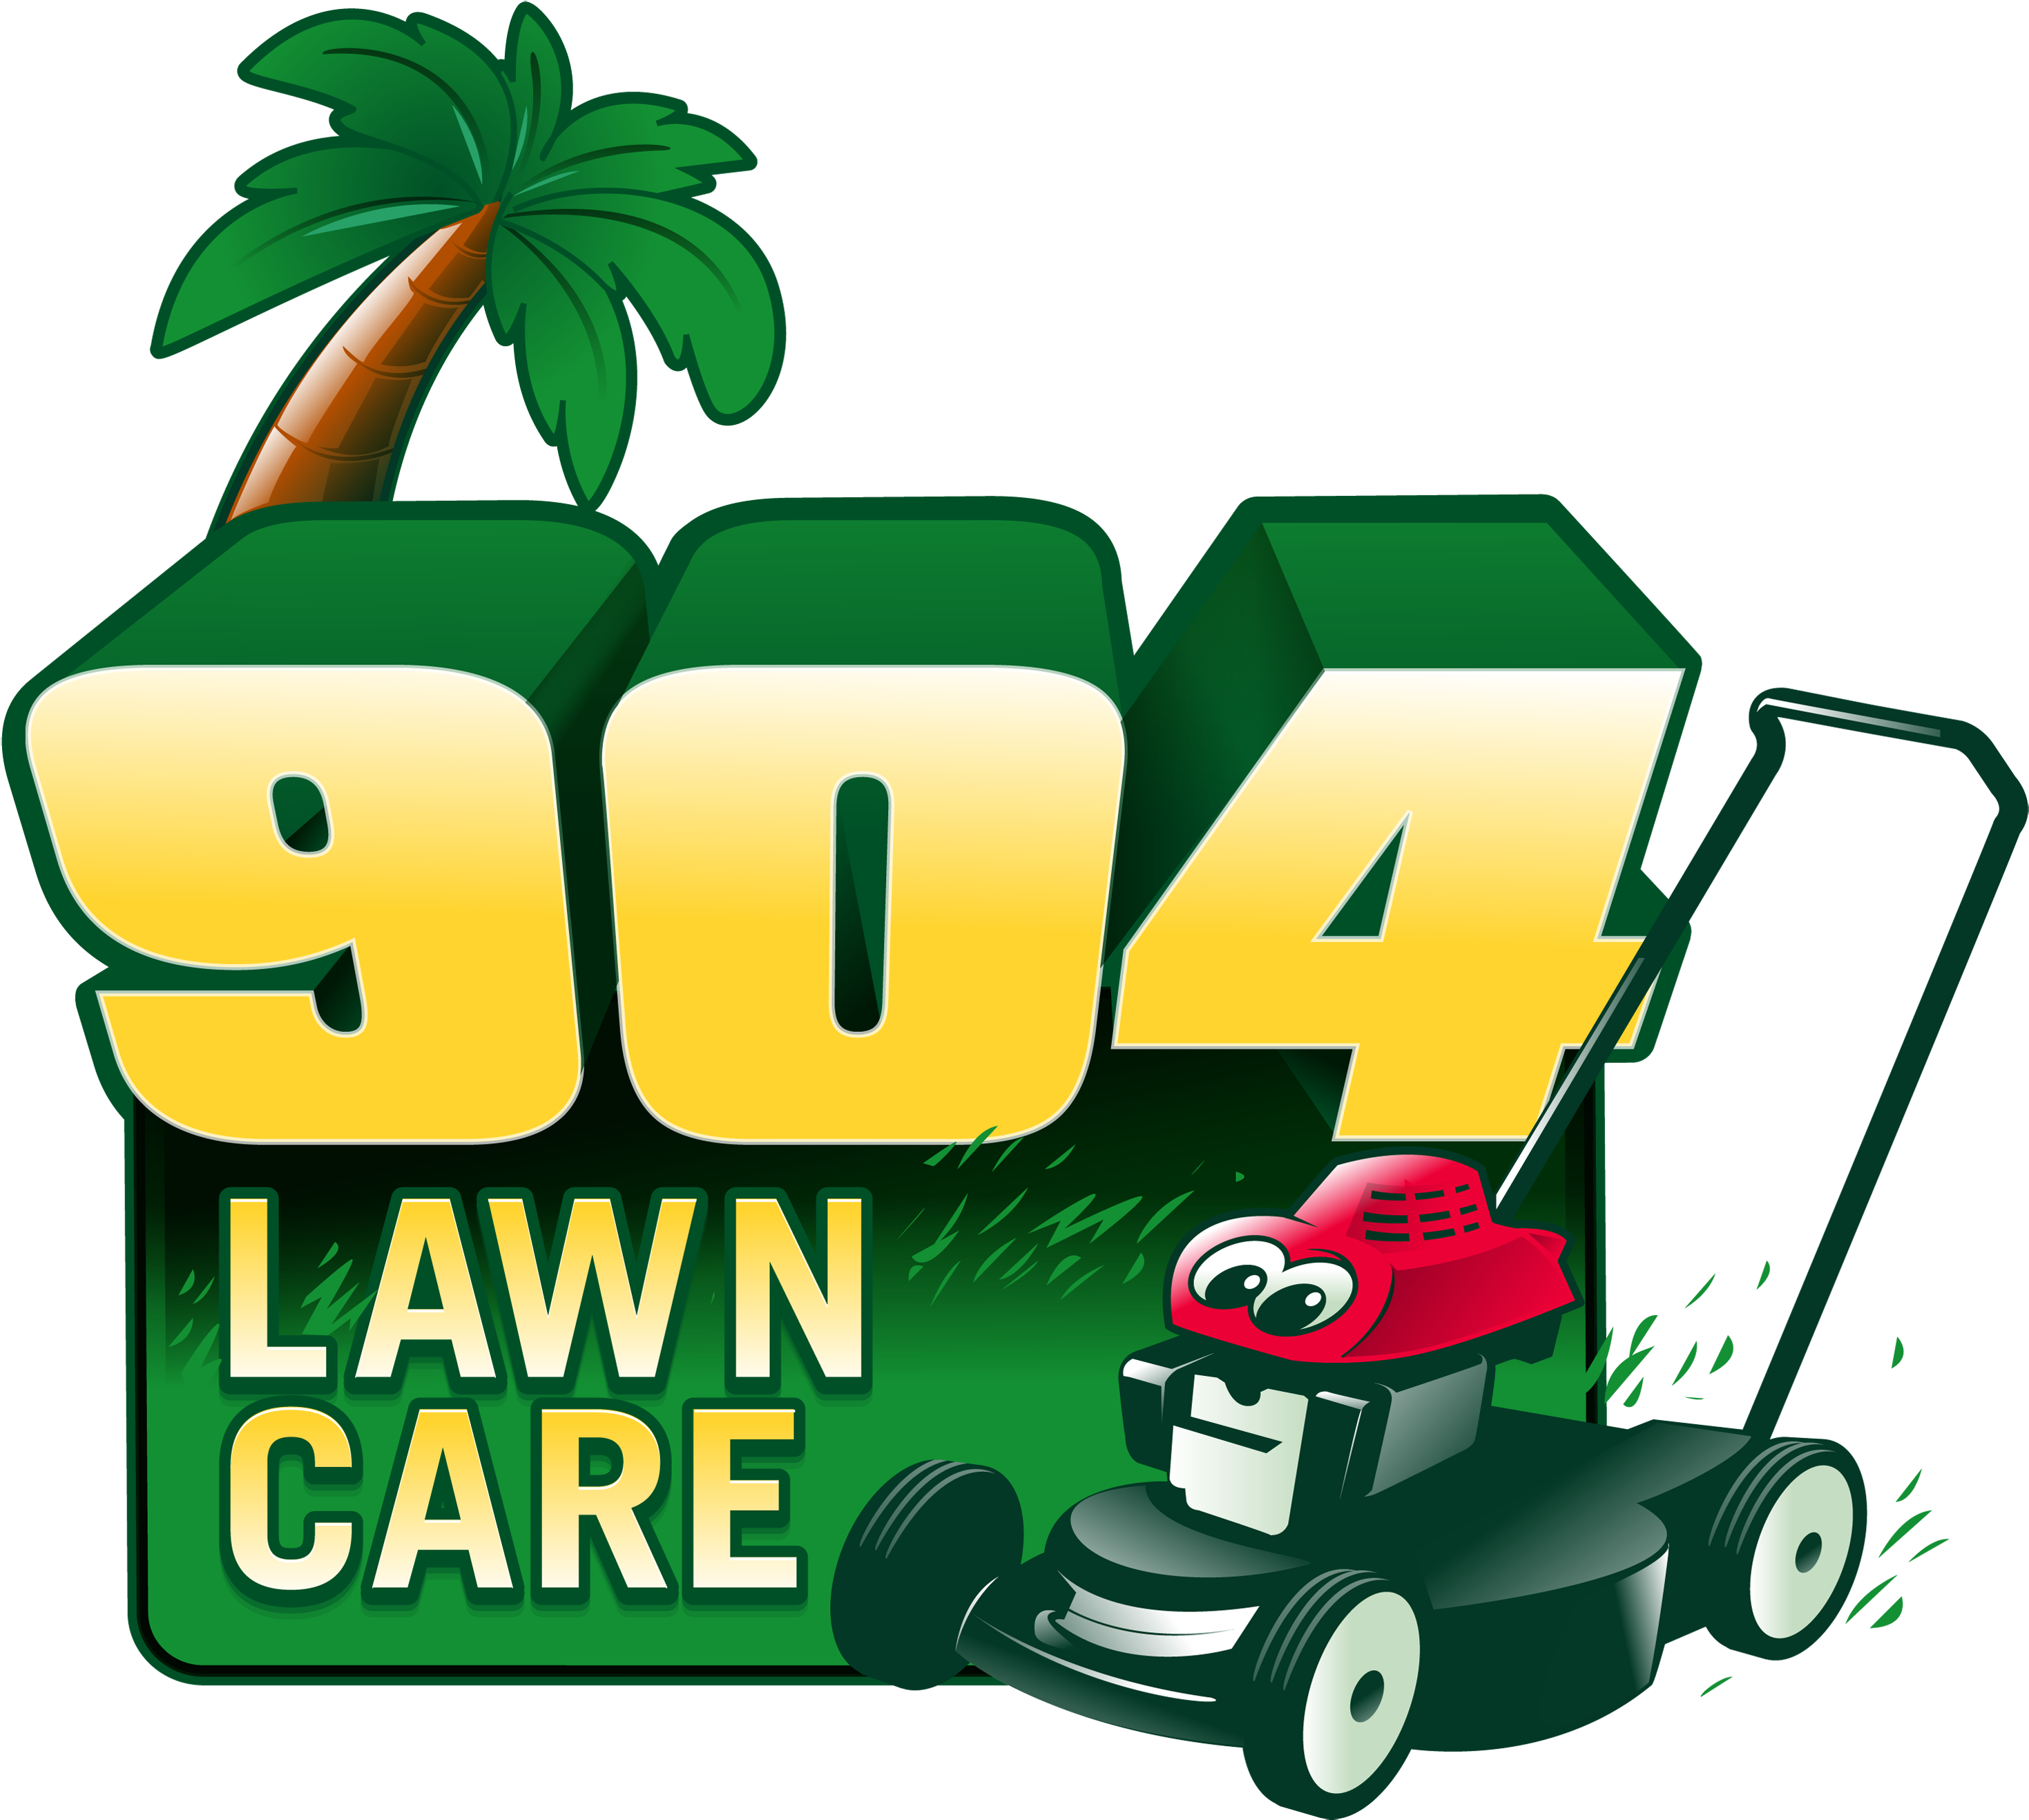 Get A Quick And Easy Price From 904 Lawn Care - Walk-behind Mower (3000x2718)